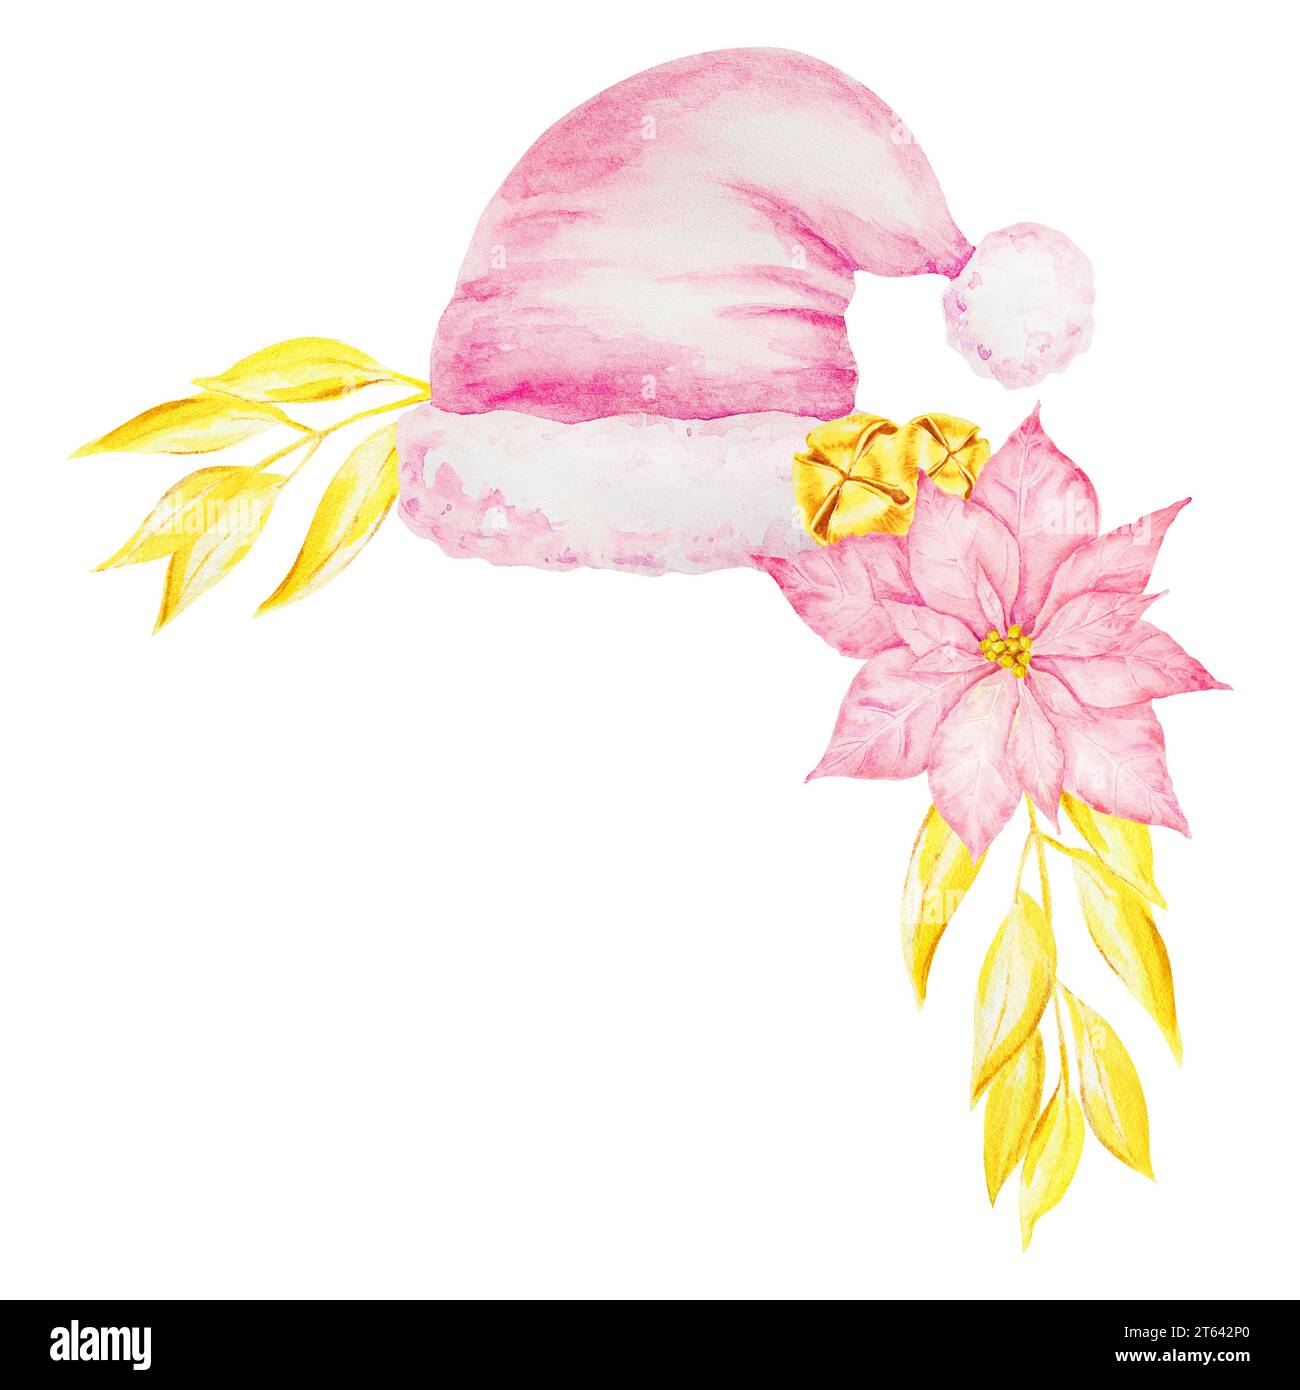 Watercolor Santa Claus pink hat, poinsettia, gold bells and branches. Christmas accessories. Hand drawn winter symbols of new year holiday for Stock Photo